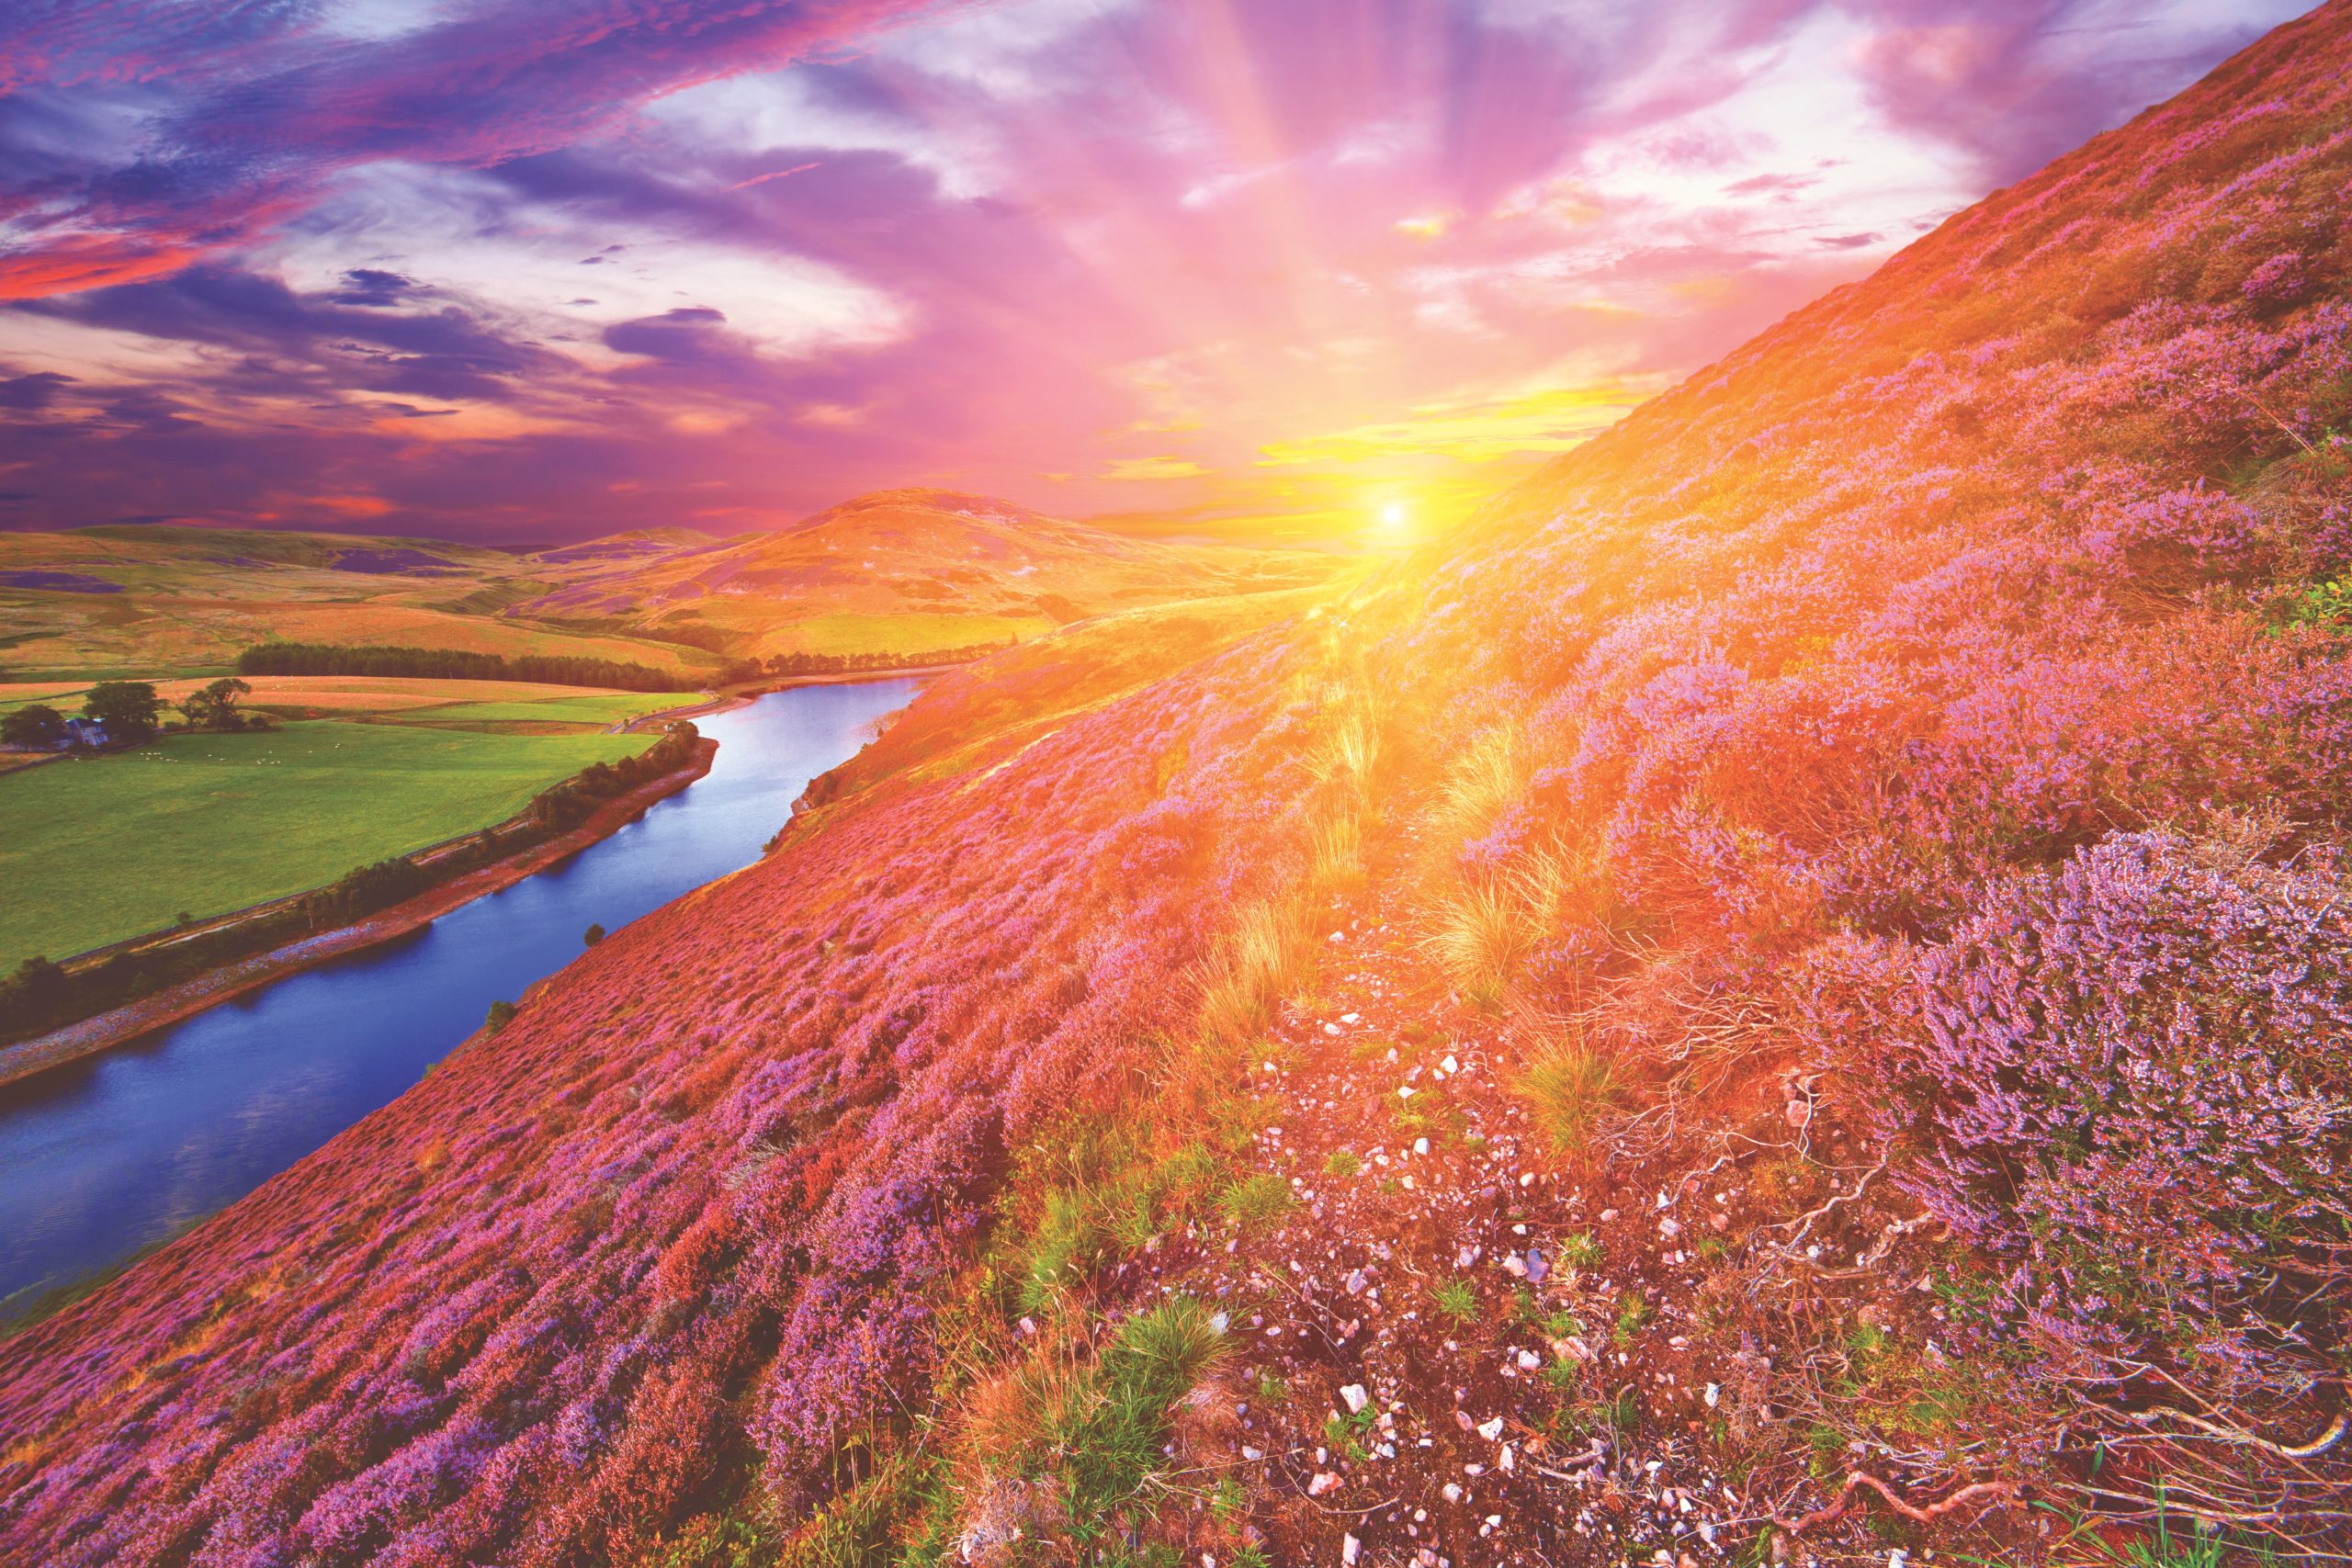 Vivid colorful landscape scenery with a footpath through the hill slope covered by violet heather flowers and green valley, river, mountains and cloudy blue sky on background. Pentland hills, near Edinburgh, Scotland.